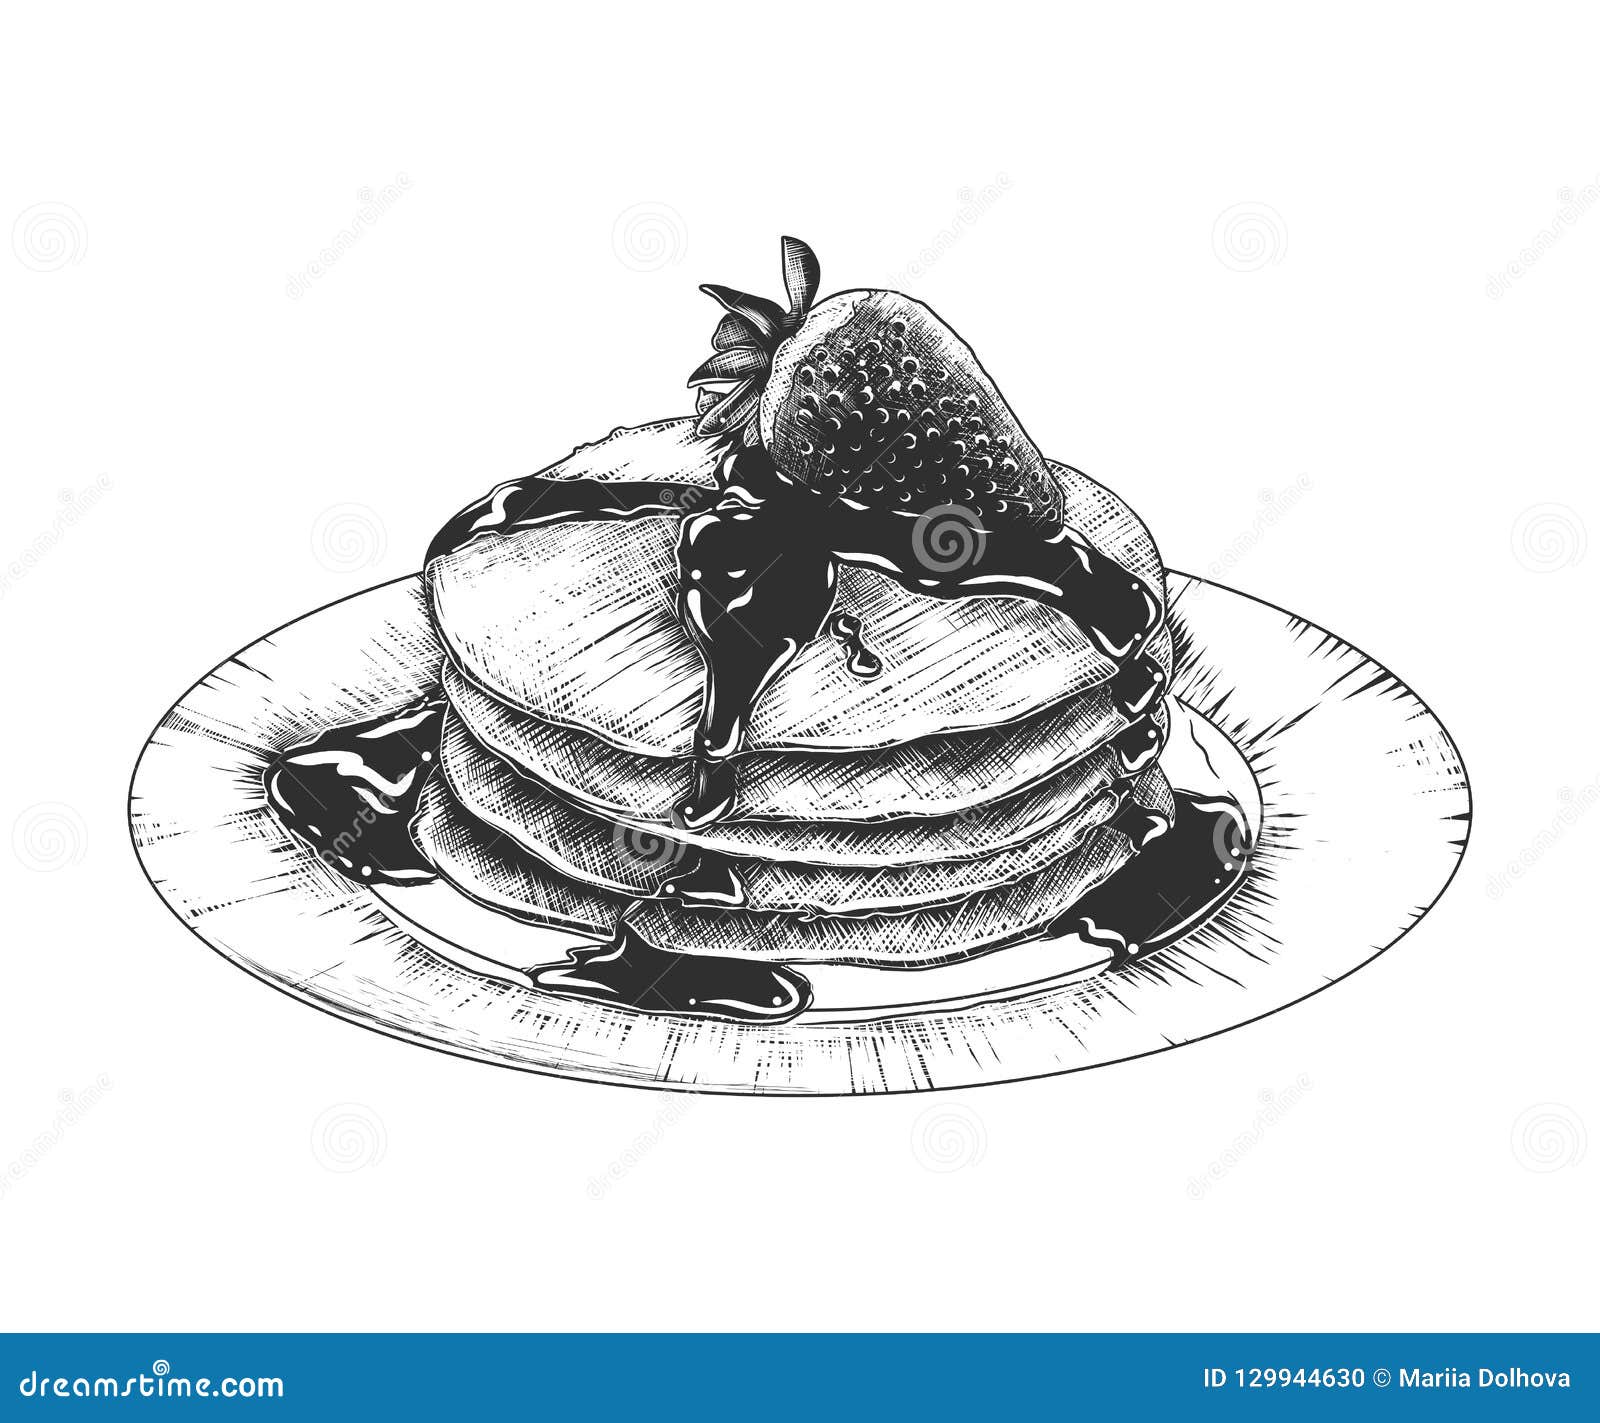 Pancake Drawing  How To Draw A Pancake Step By Step